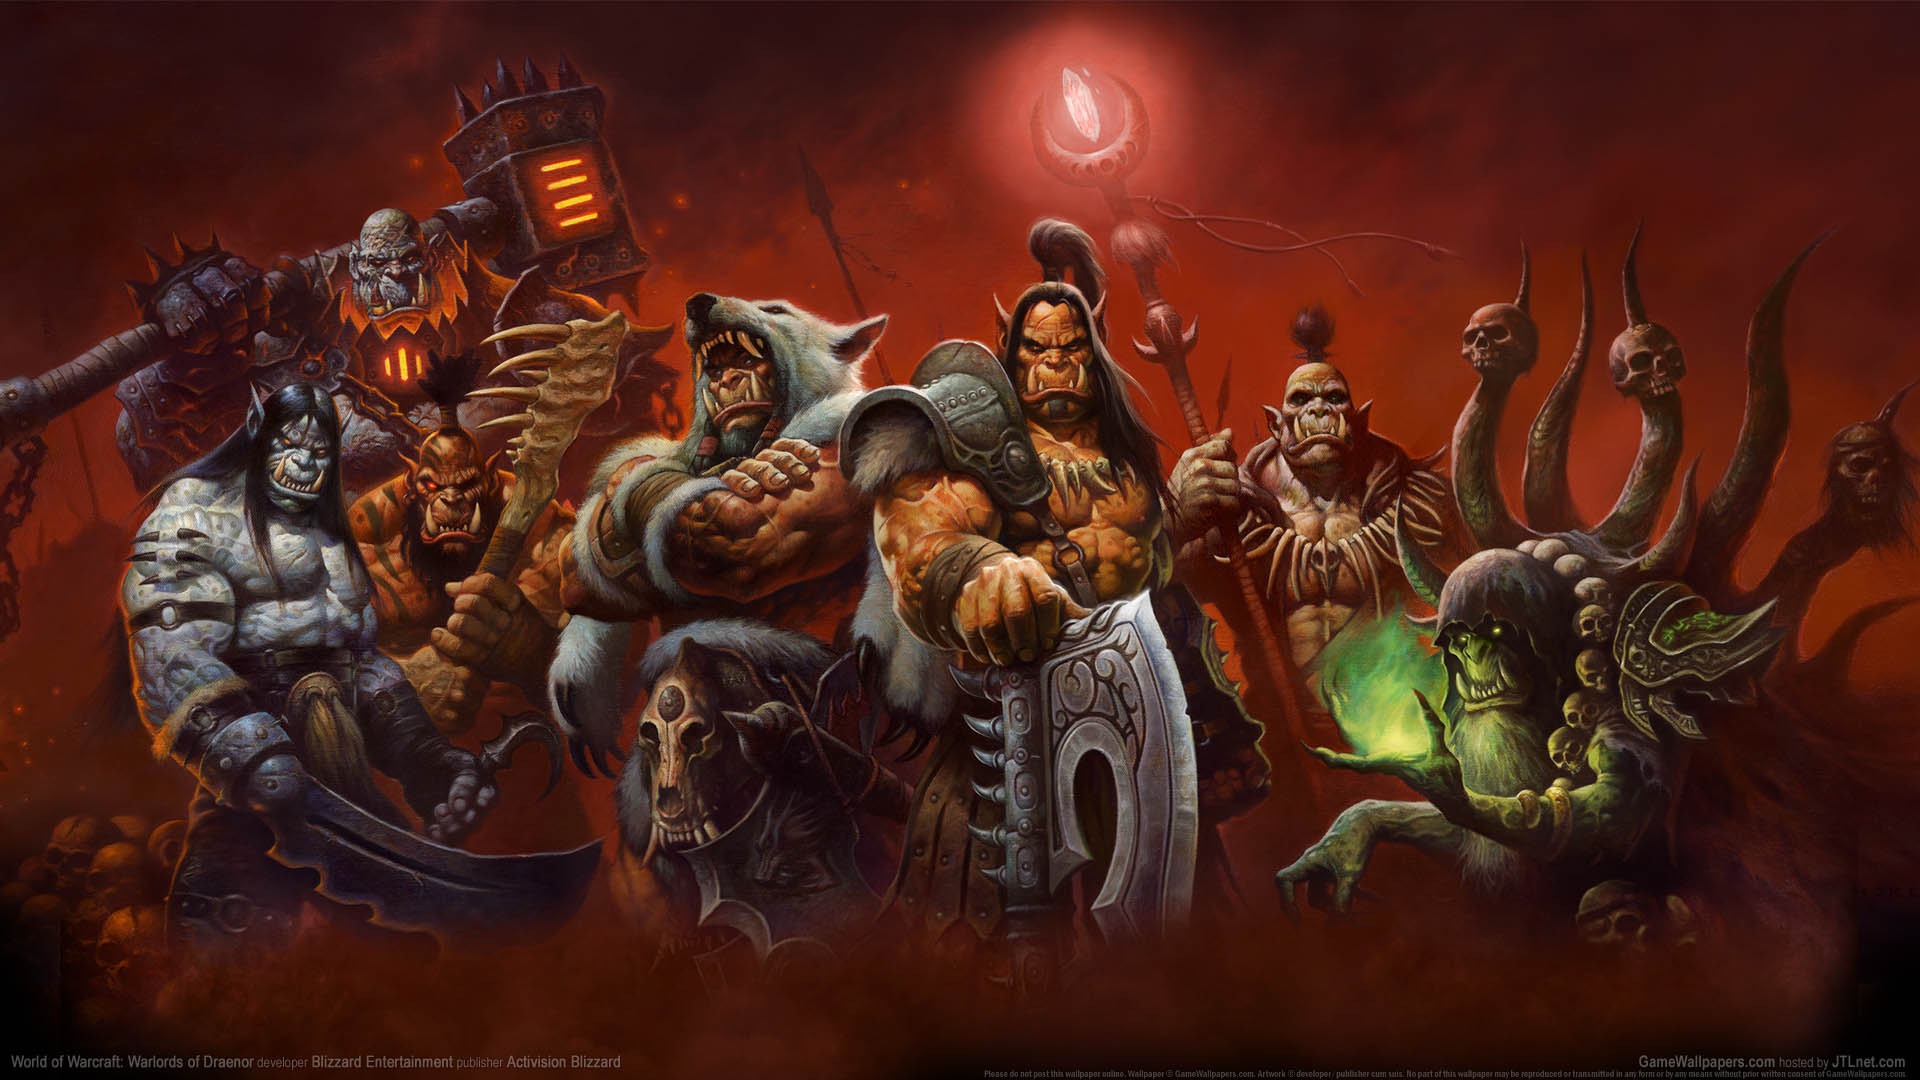 World of Warcraft: Warlords of Draenor wallpaper 01 1920x1080